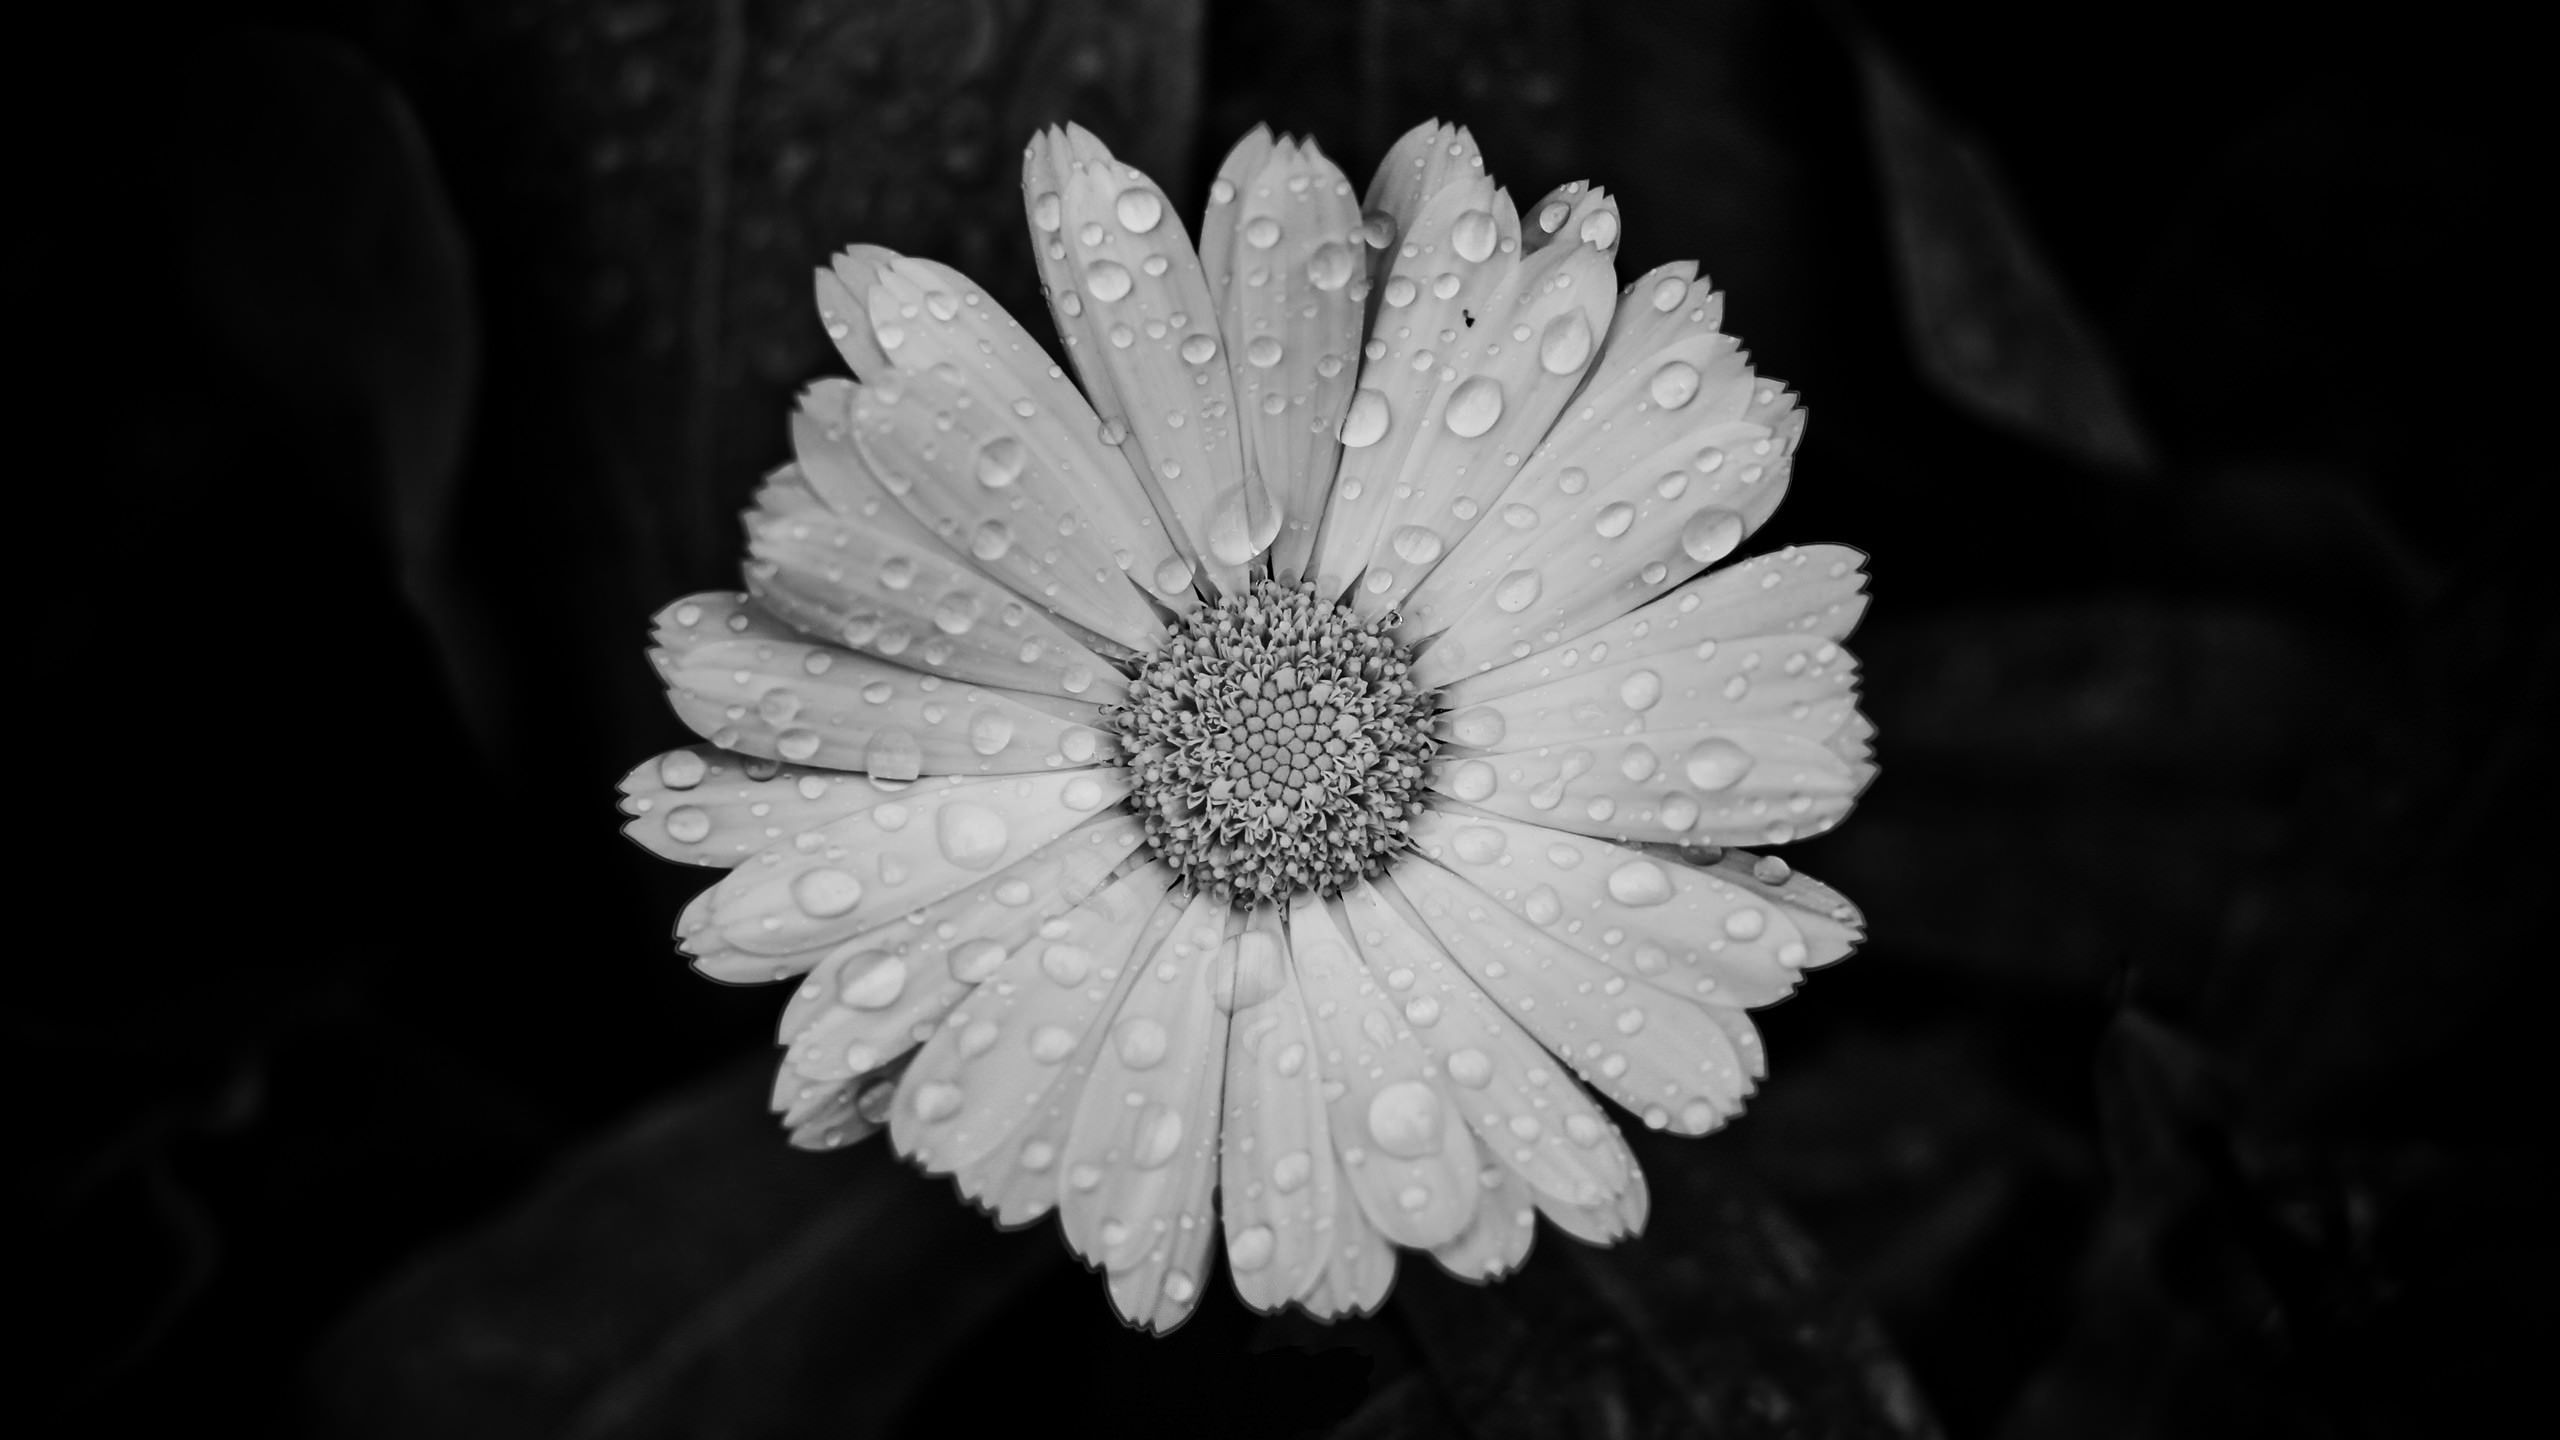 A black and white photo of a flower with water droplets on it - Black and white